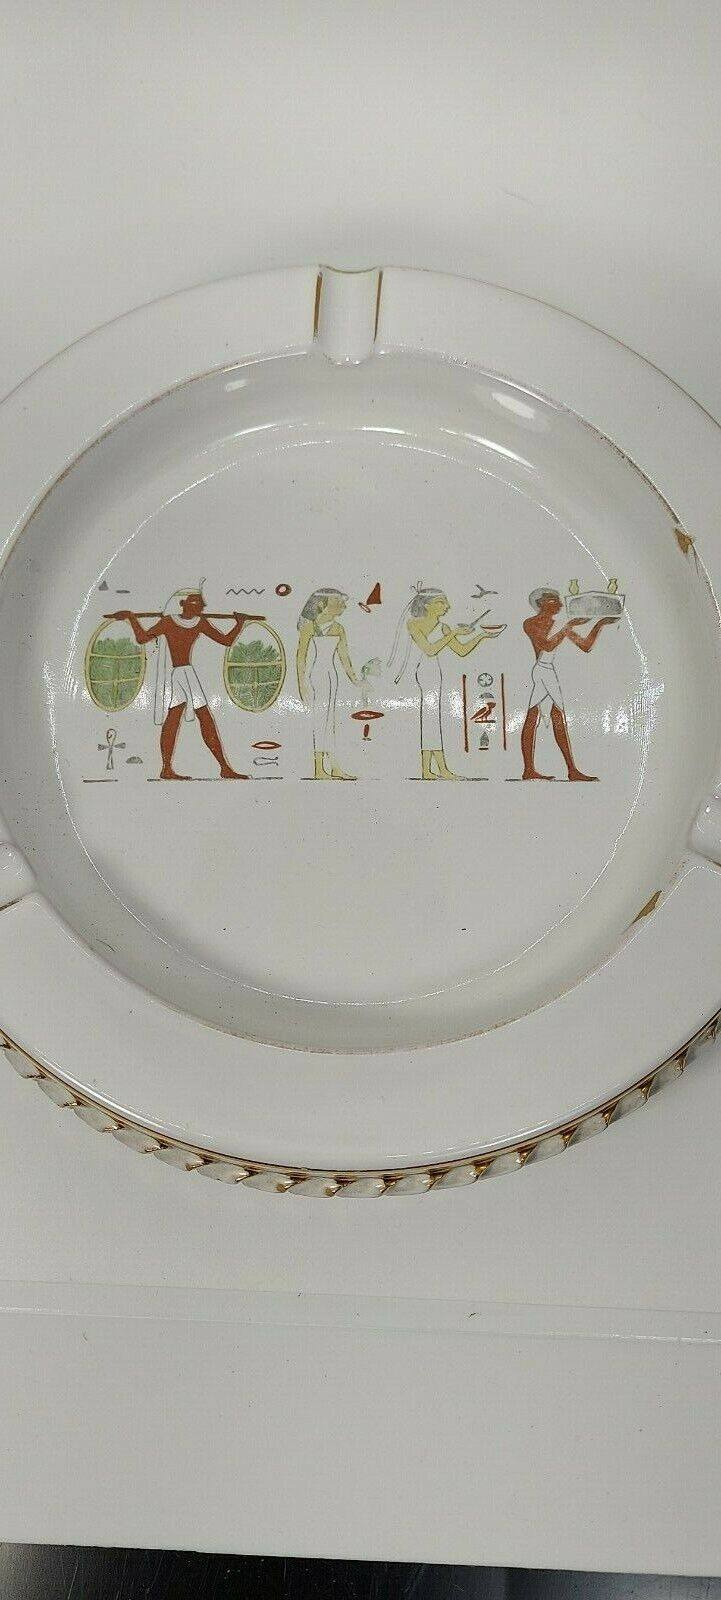 Vintage K.P.N.Y. Porcelain Ashtray w/ Egyptian Theme Made in Italy